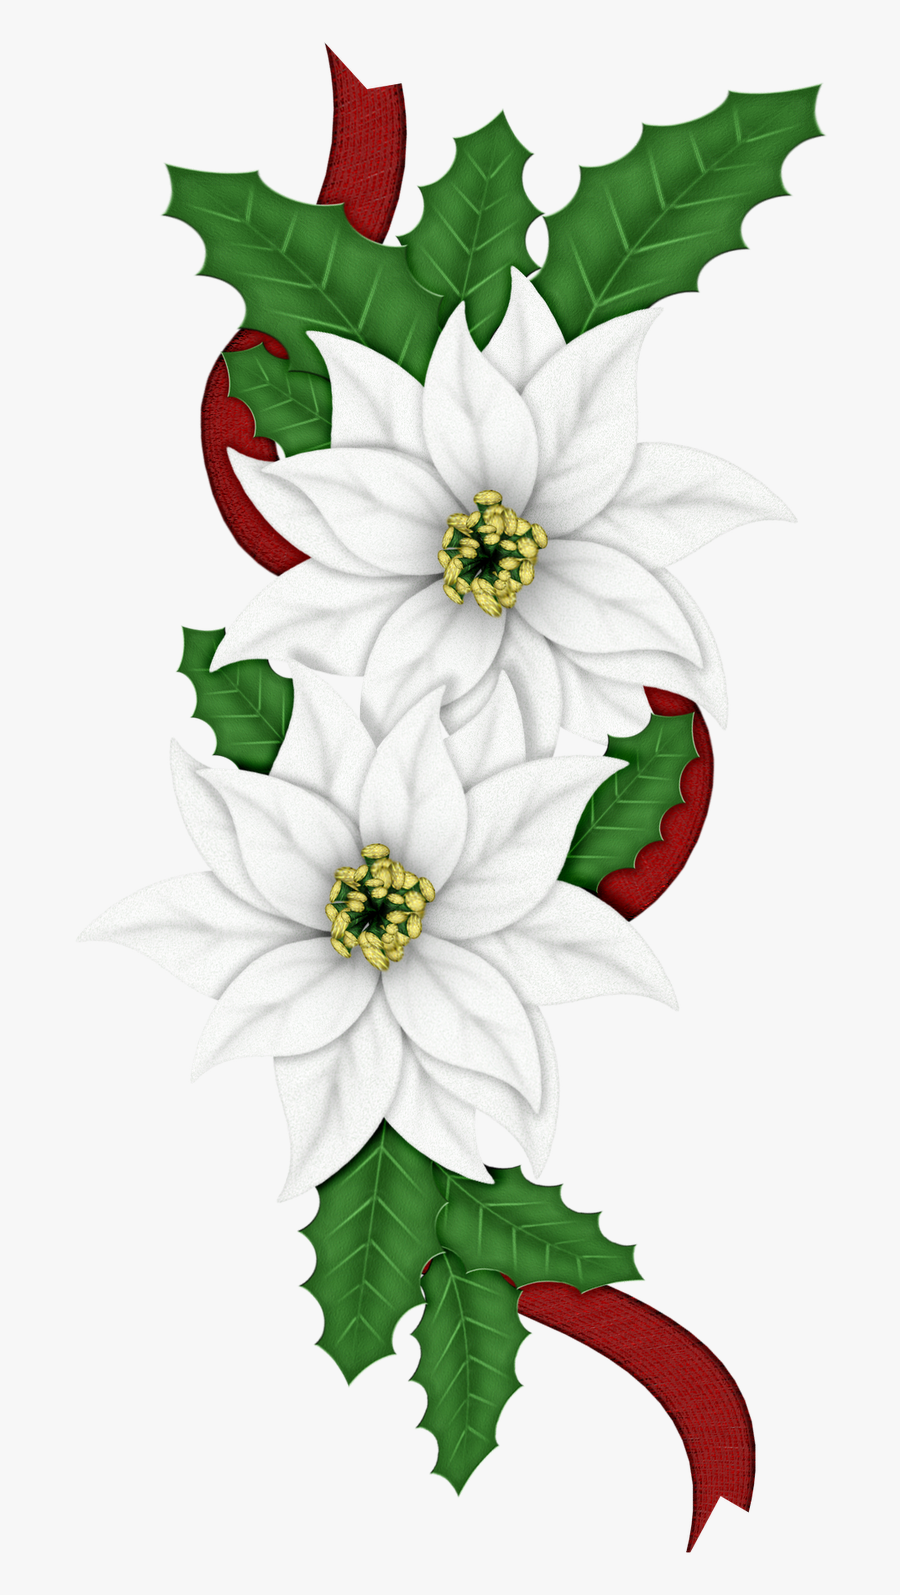 Edelweiss Png - Edelweiss Png Clipart, Transparent Clipart